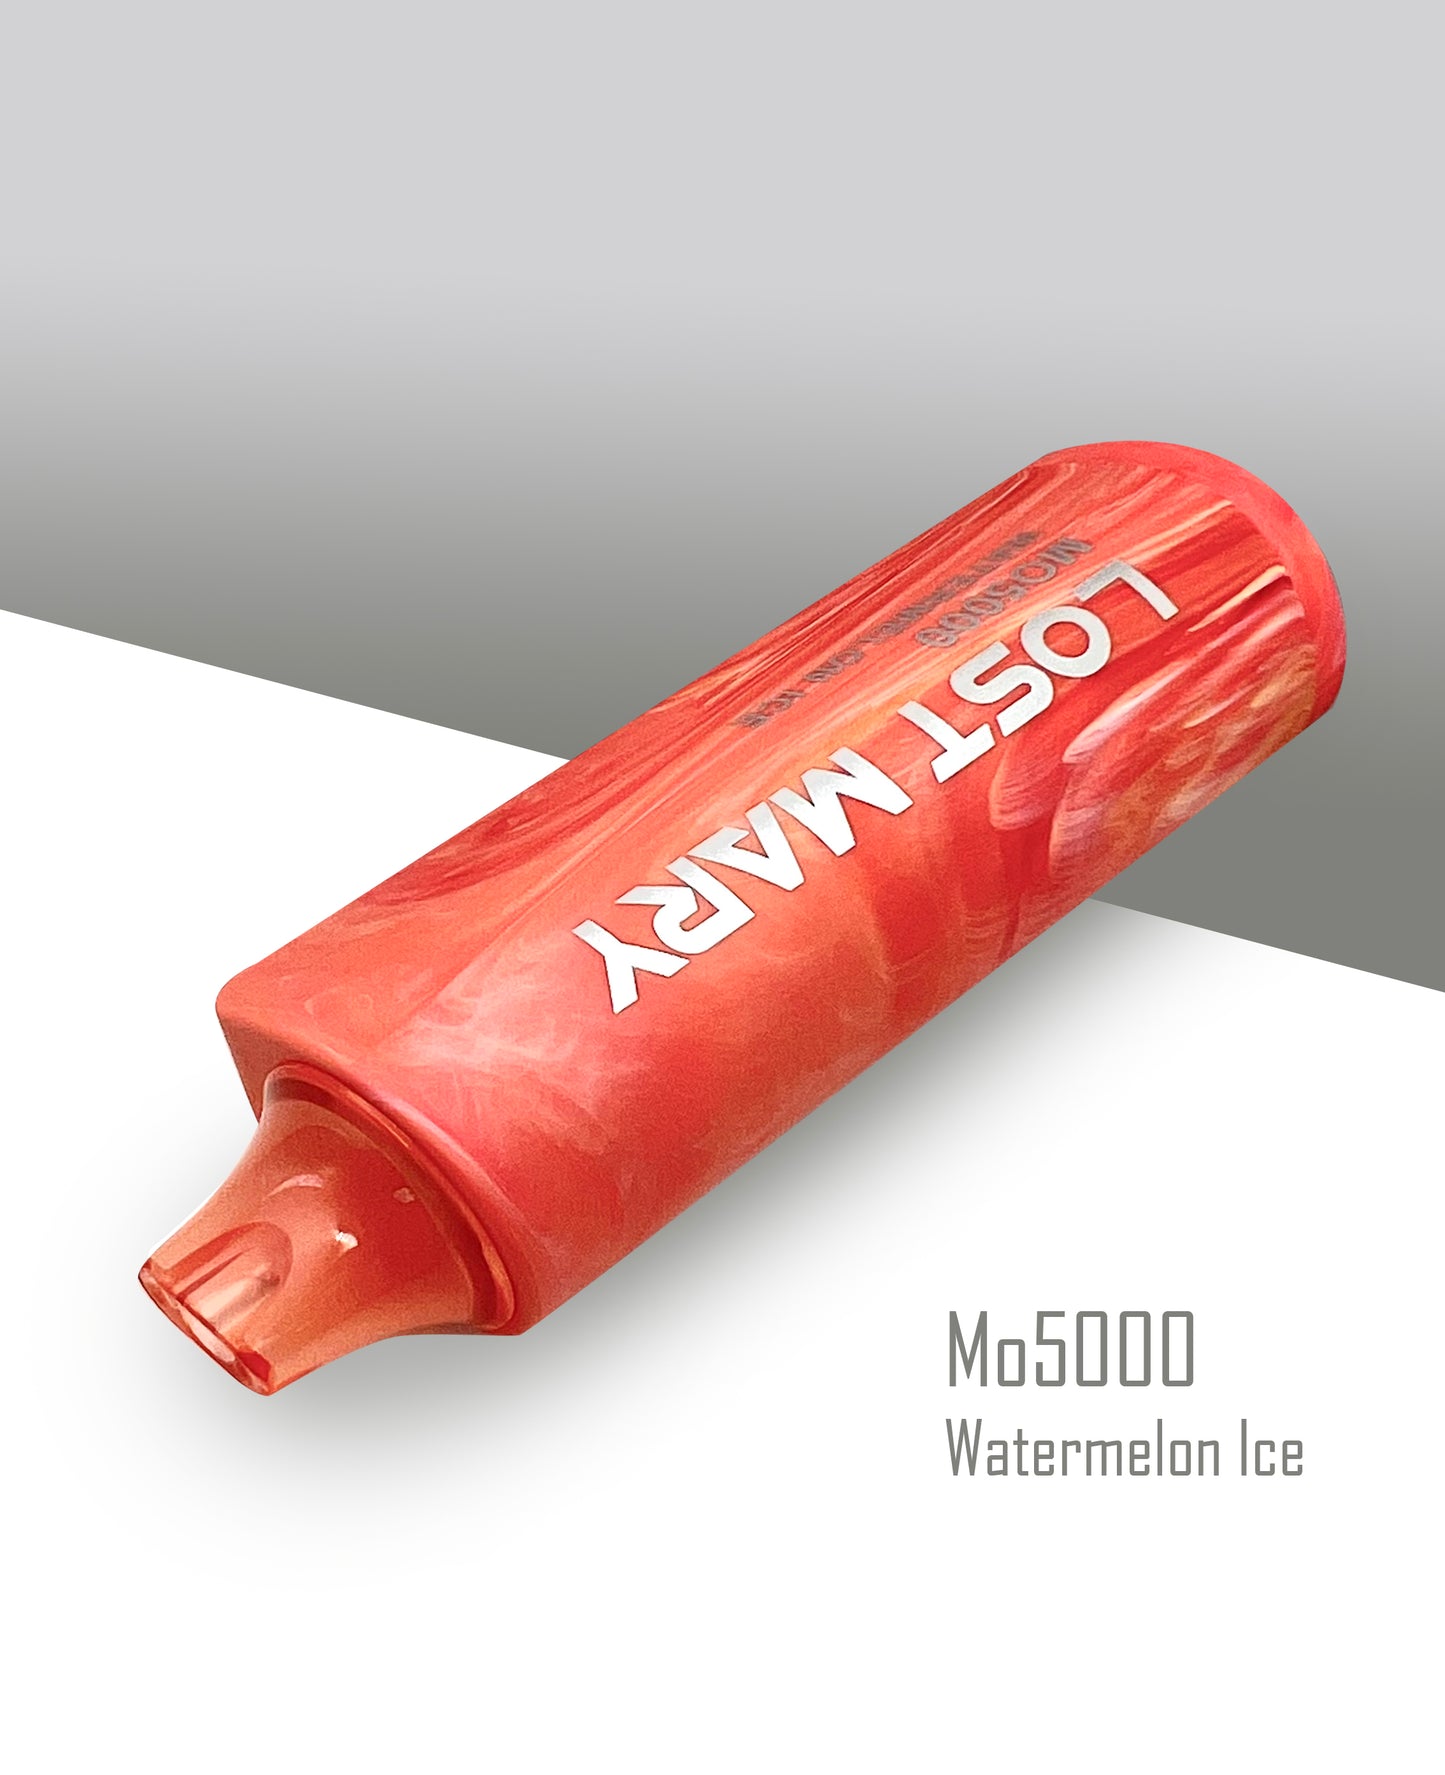 Vape Central Wholesale| Lost Marry Mo5000 | Disposable vape wholesale| Lost Mary MO5000 vape wholesale| lost mary mo5000 flavor watermelon ice